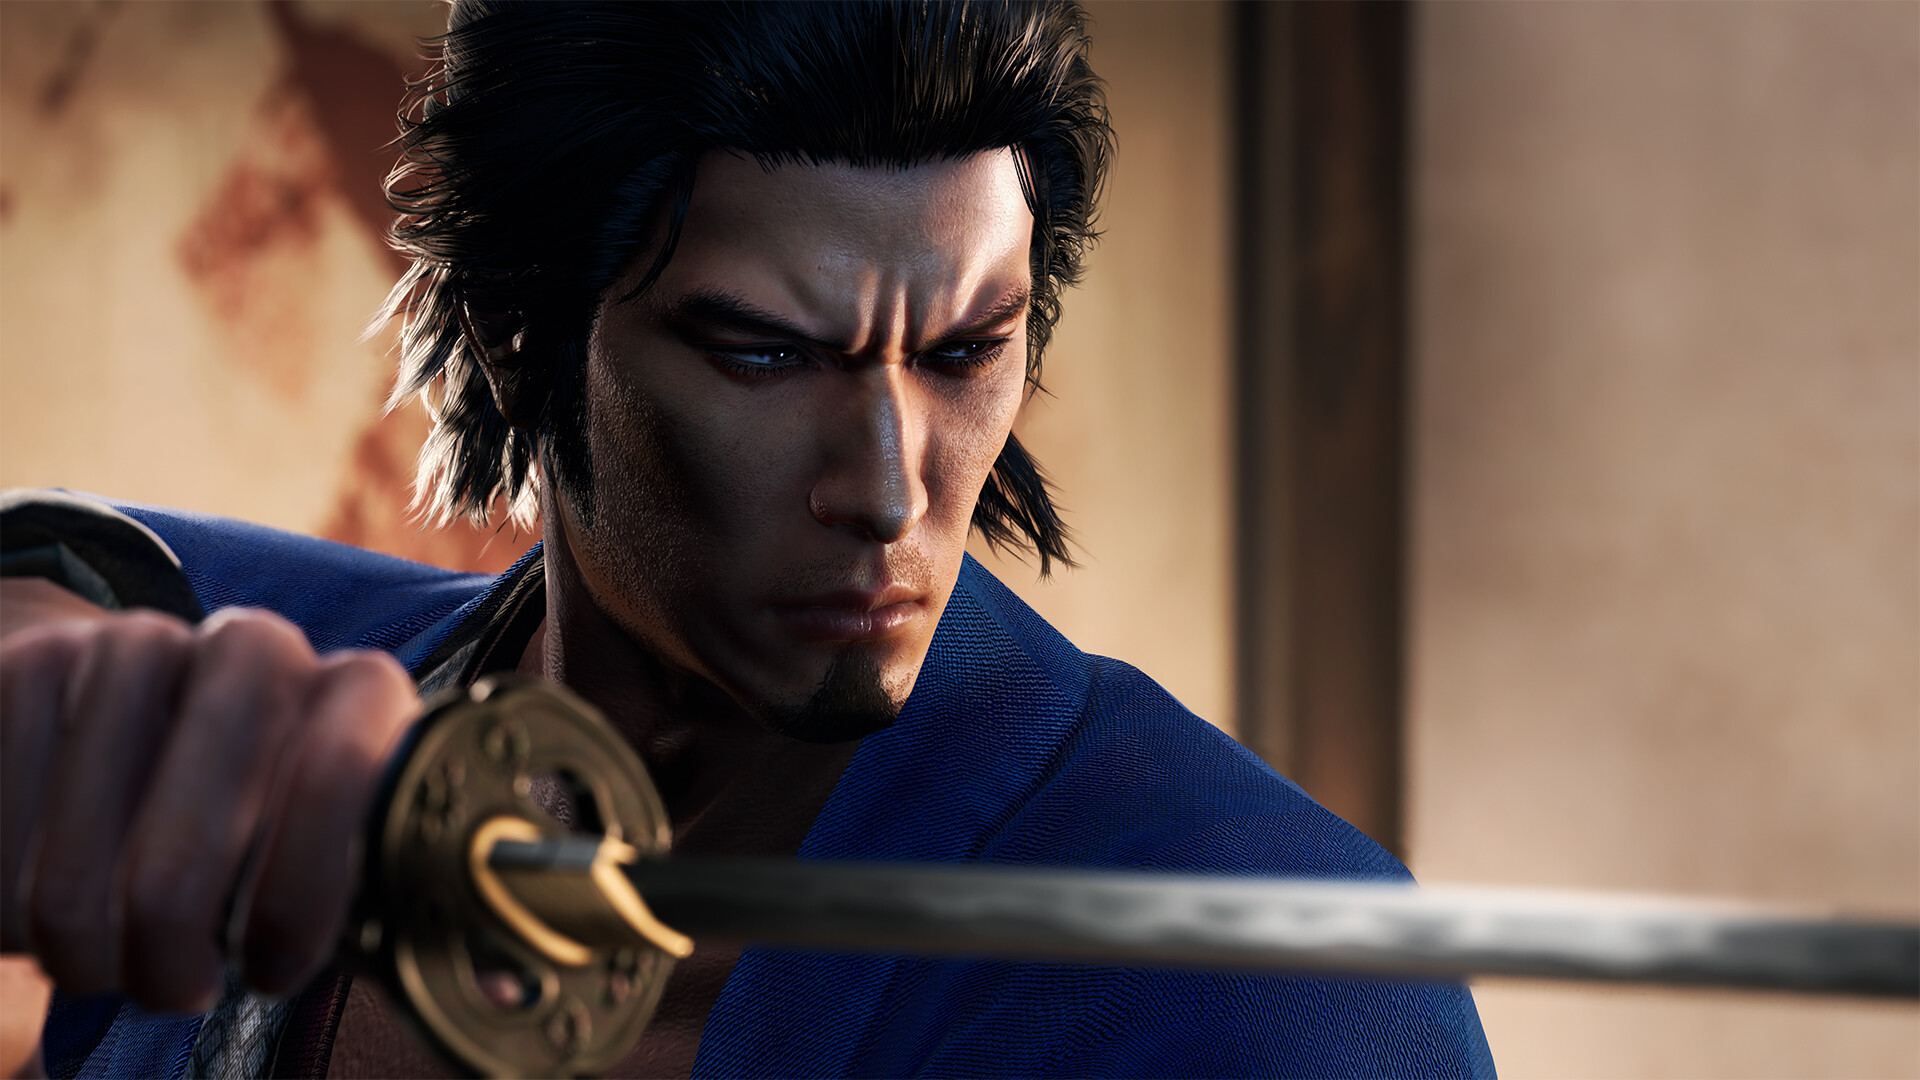 Like A Dragon: Ishin! PlayStation 5 Account Pixelpuffin.net Activation Link